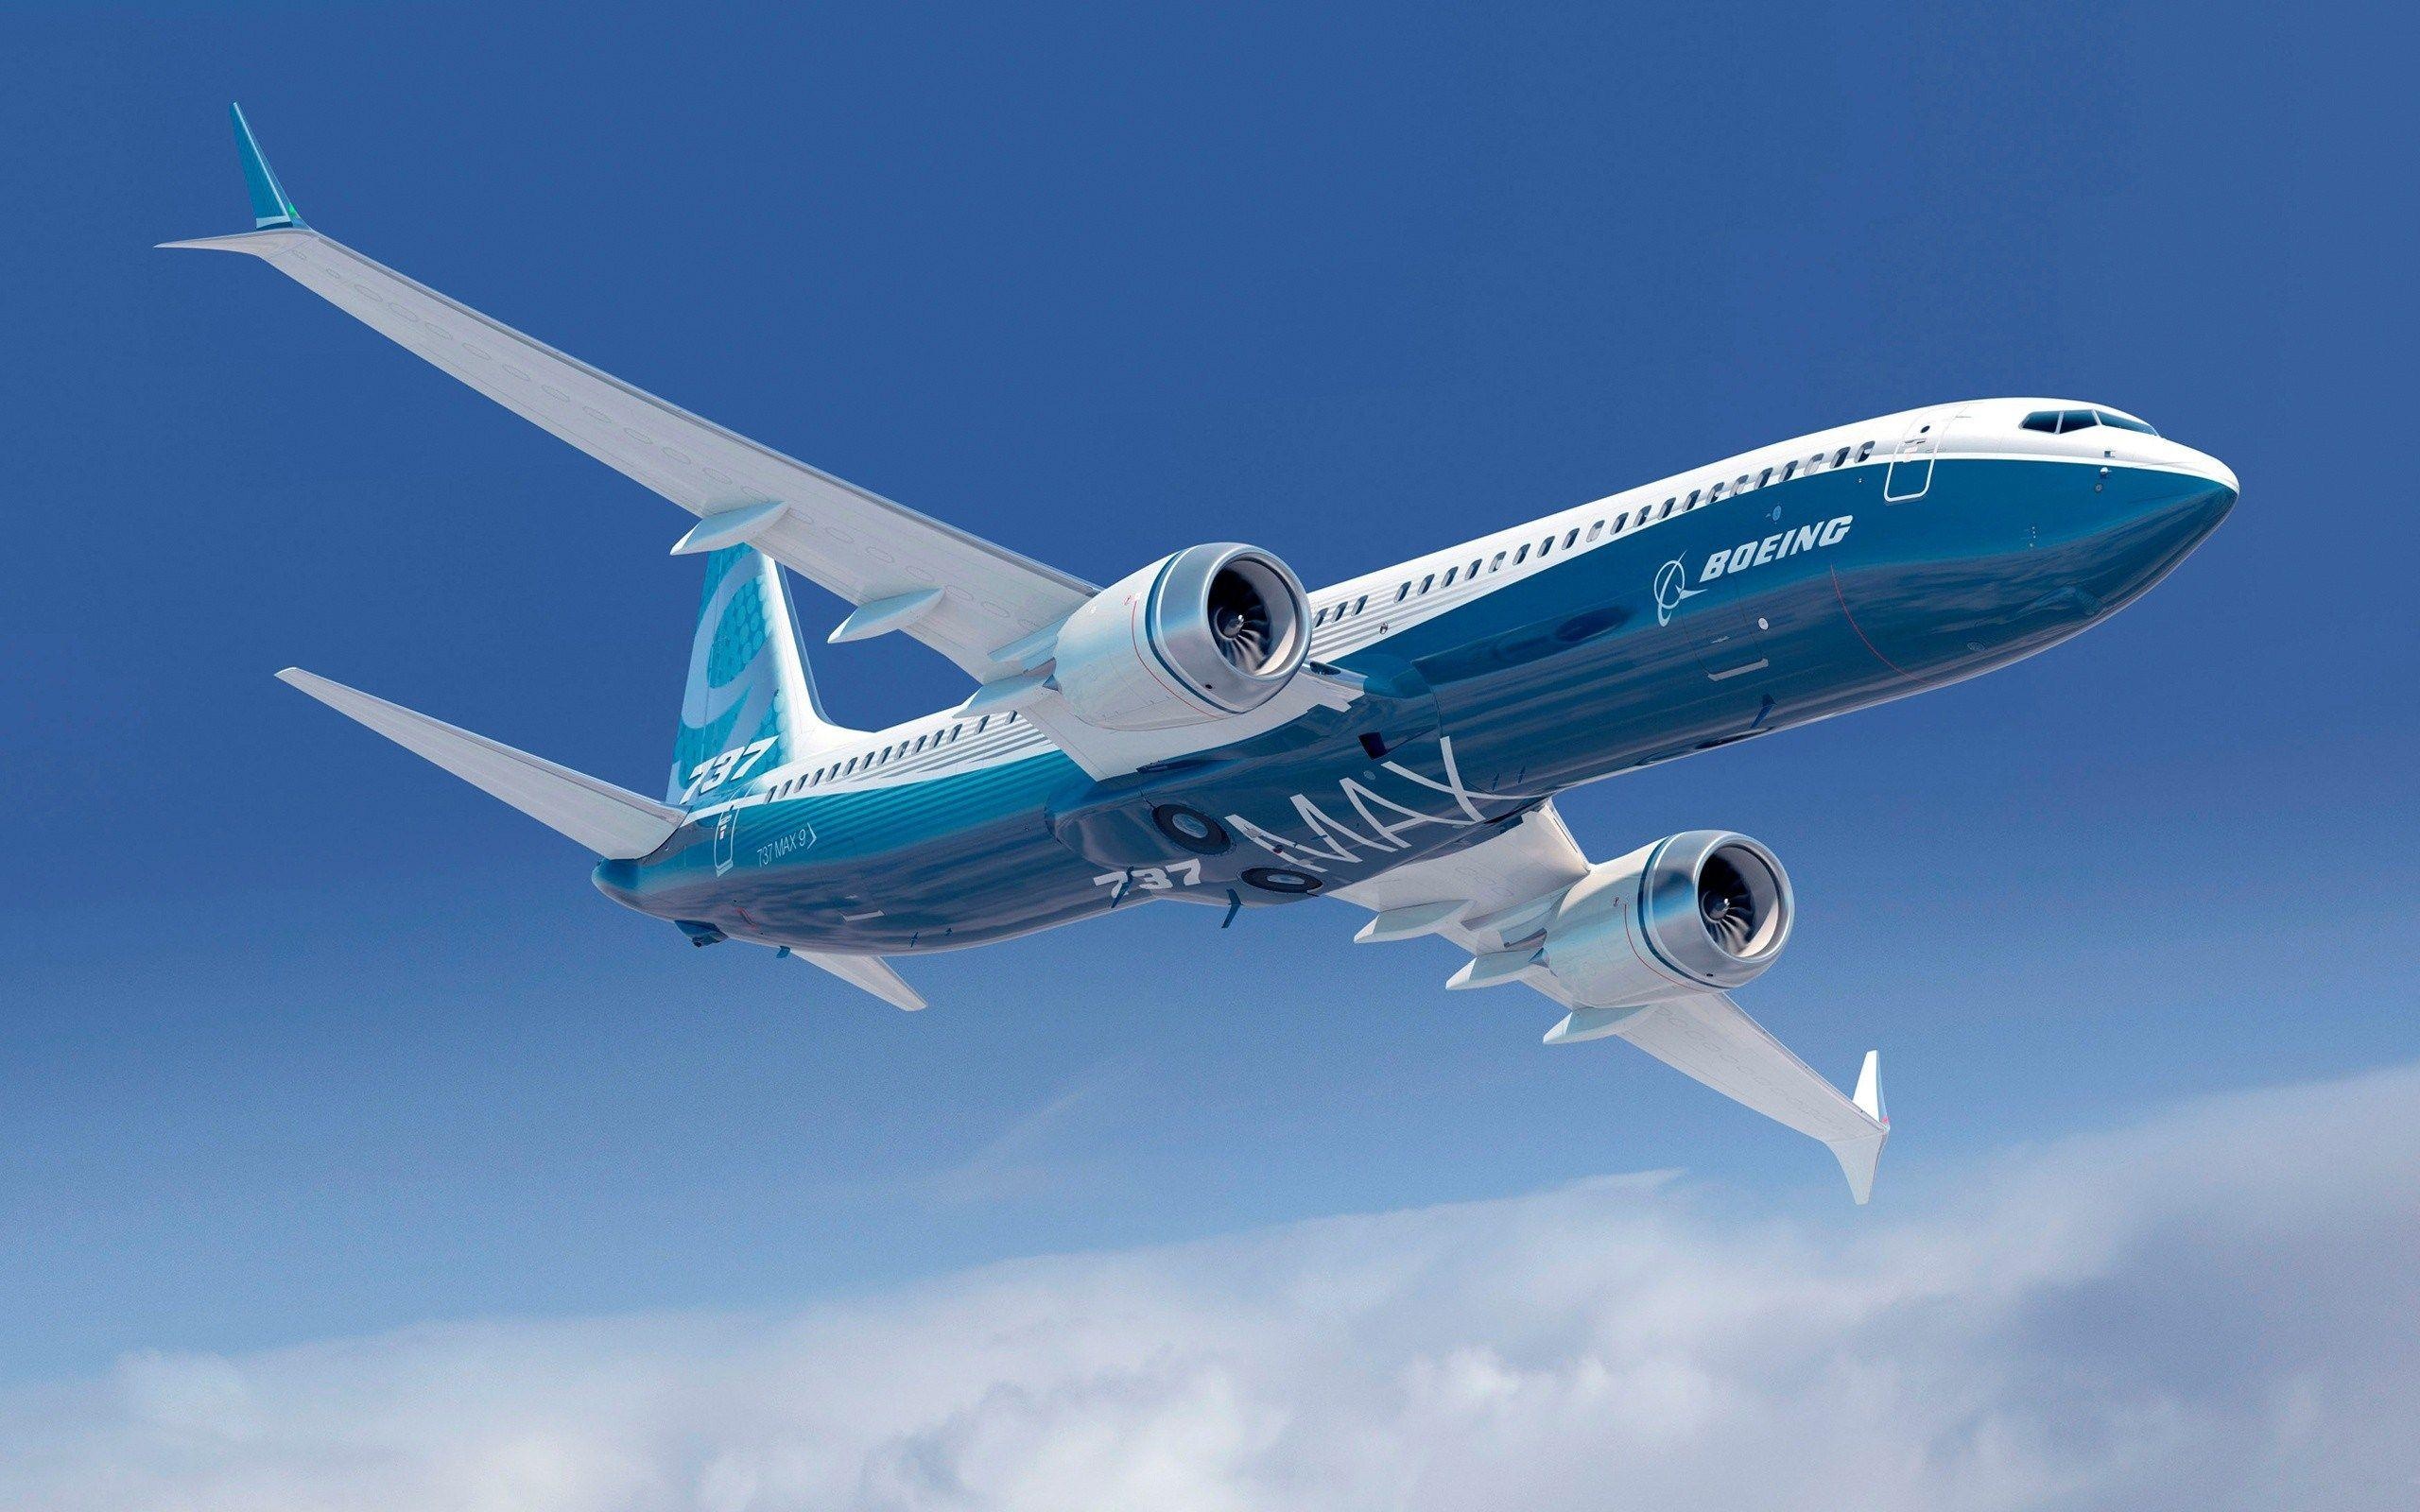 Boeing 737 Max, Cutting-edge technology, Future of aviation, Sky's the limit, 2560x1600 HD Desktop